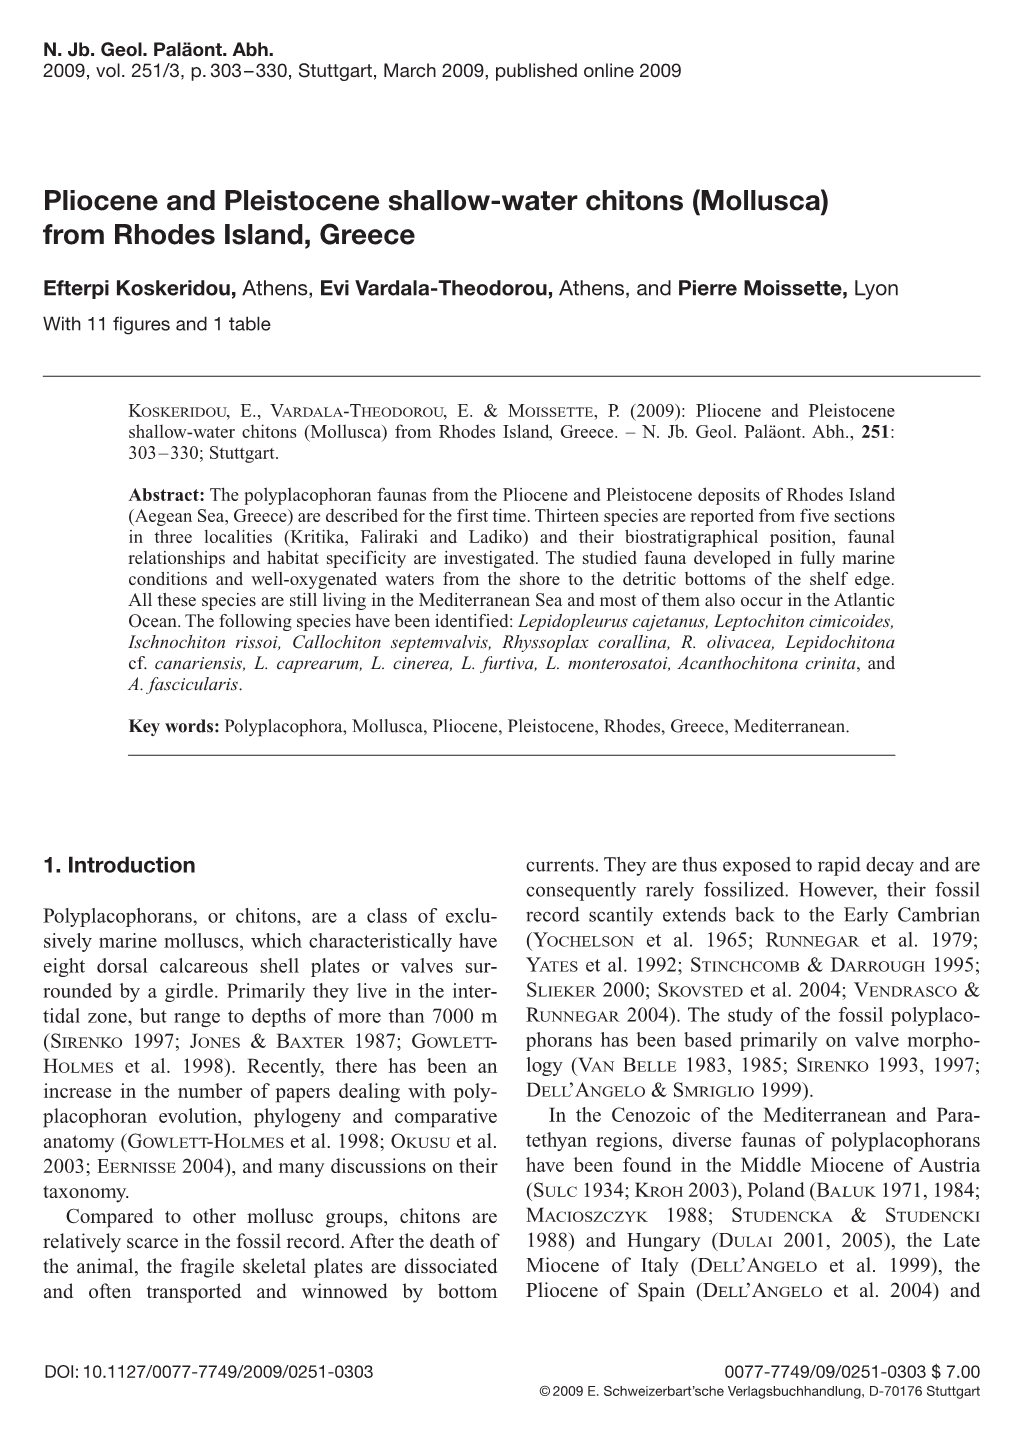 Pliocene and Pleistocene Shallow-Water Chitons (Mollusca) from Rhodes Island, Greece